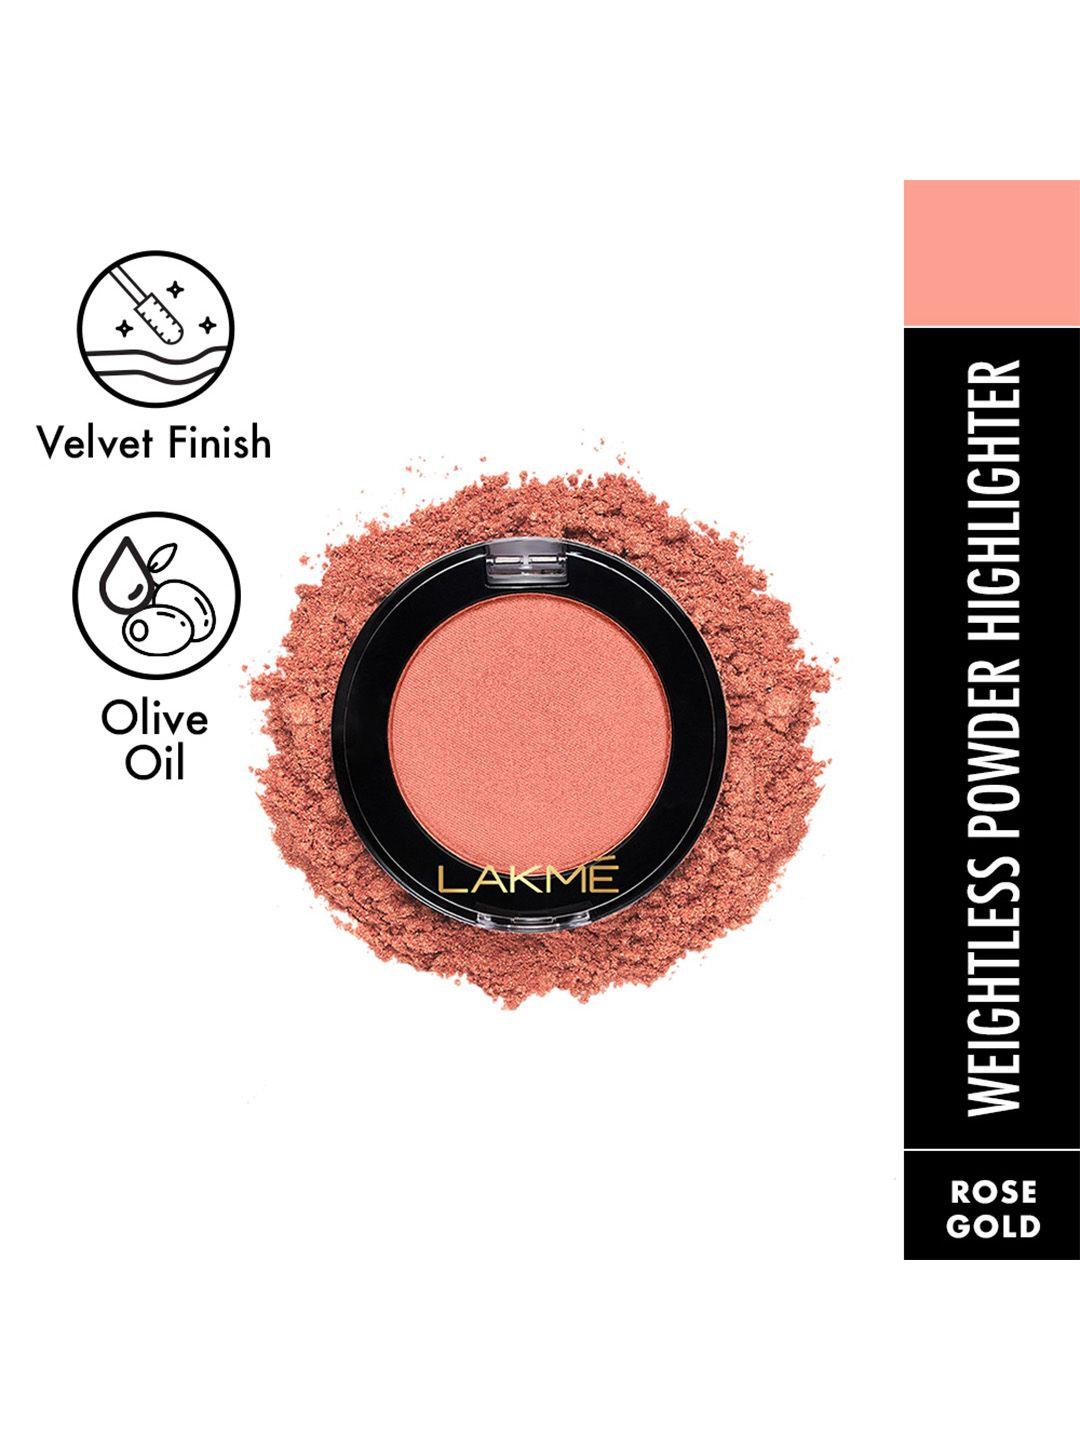 lakme-face-it-weightless-pressed-powder-highlighter-with-olive-oil-4-g---rose-gold-h3